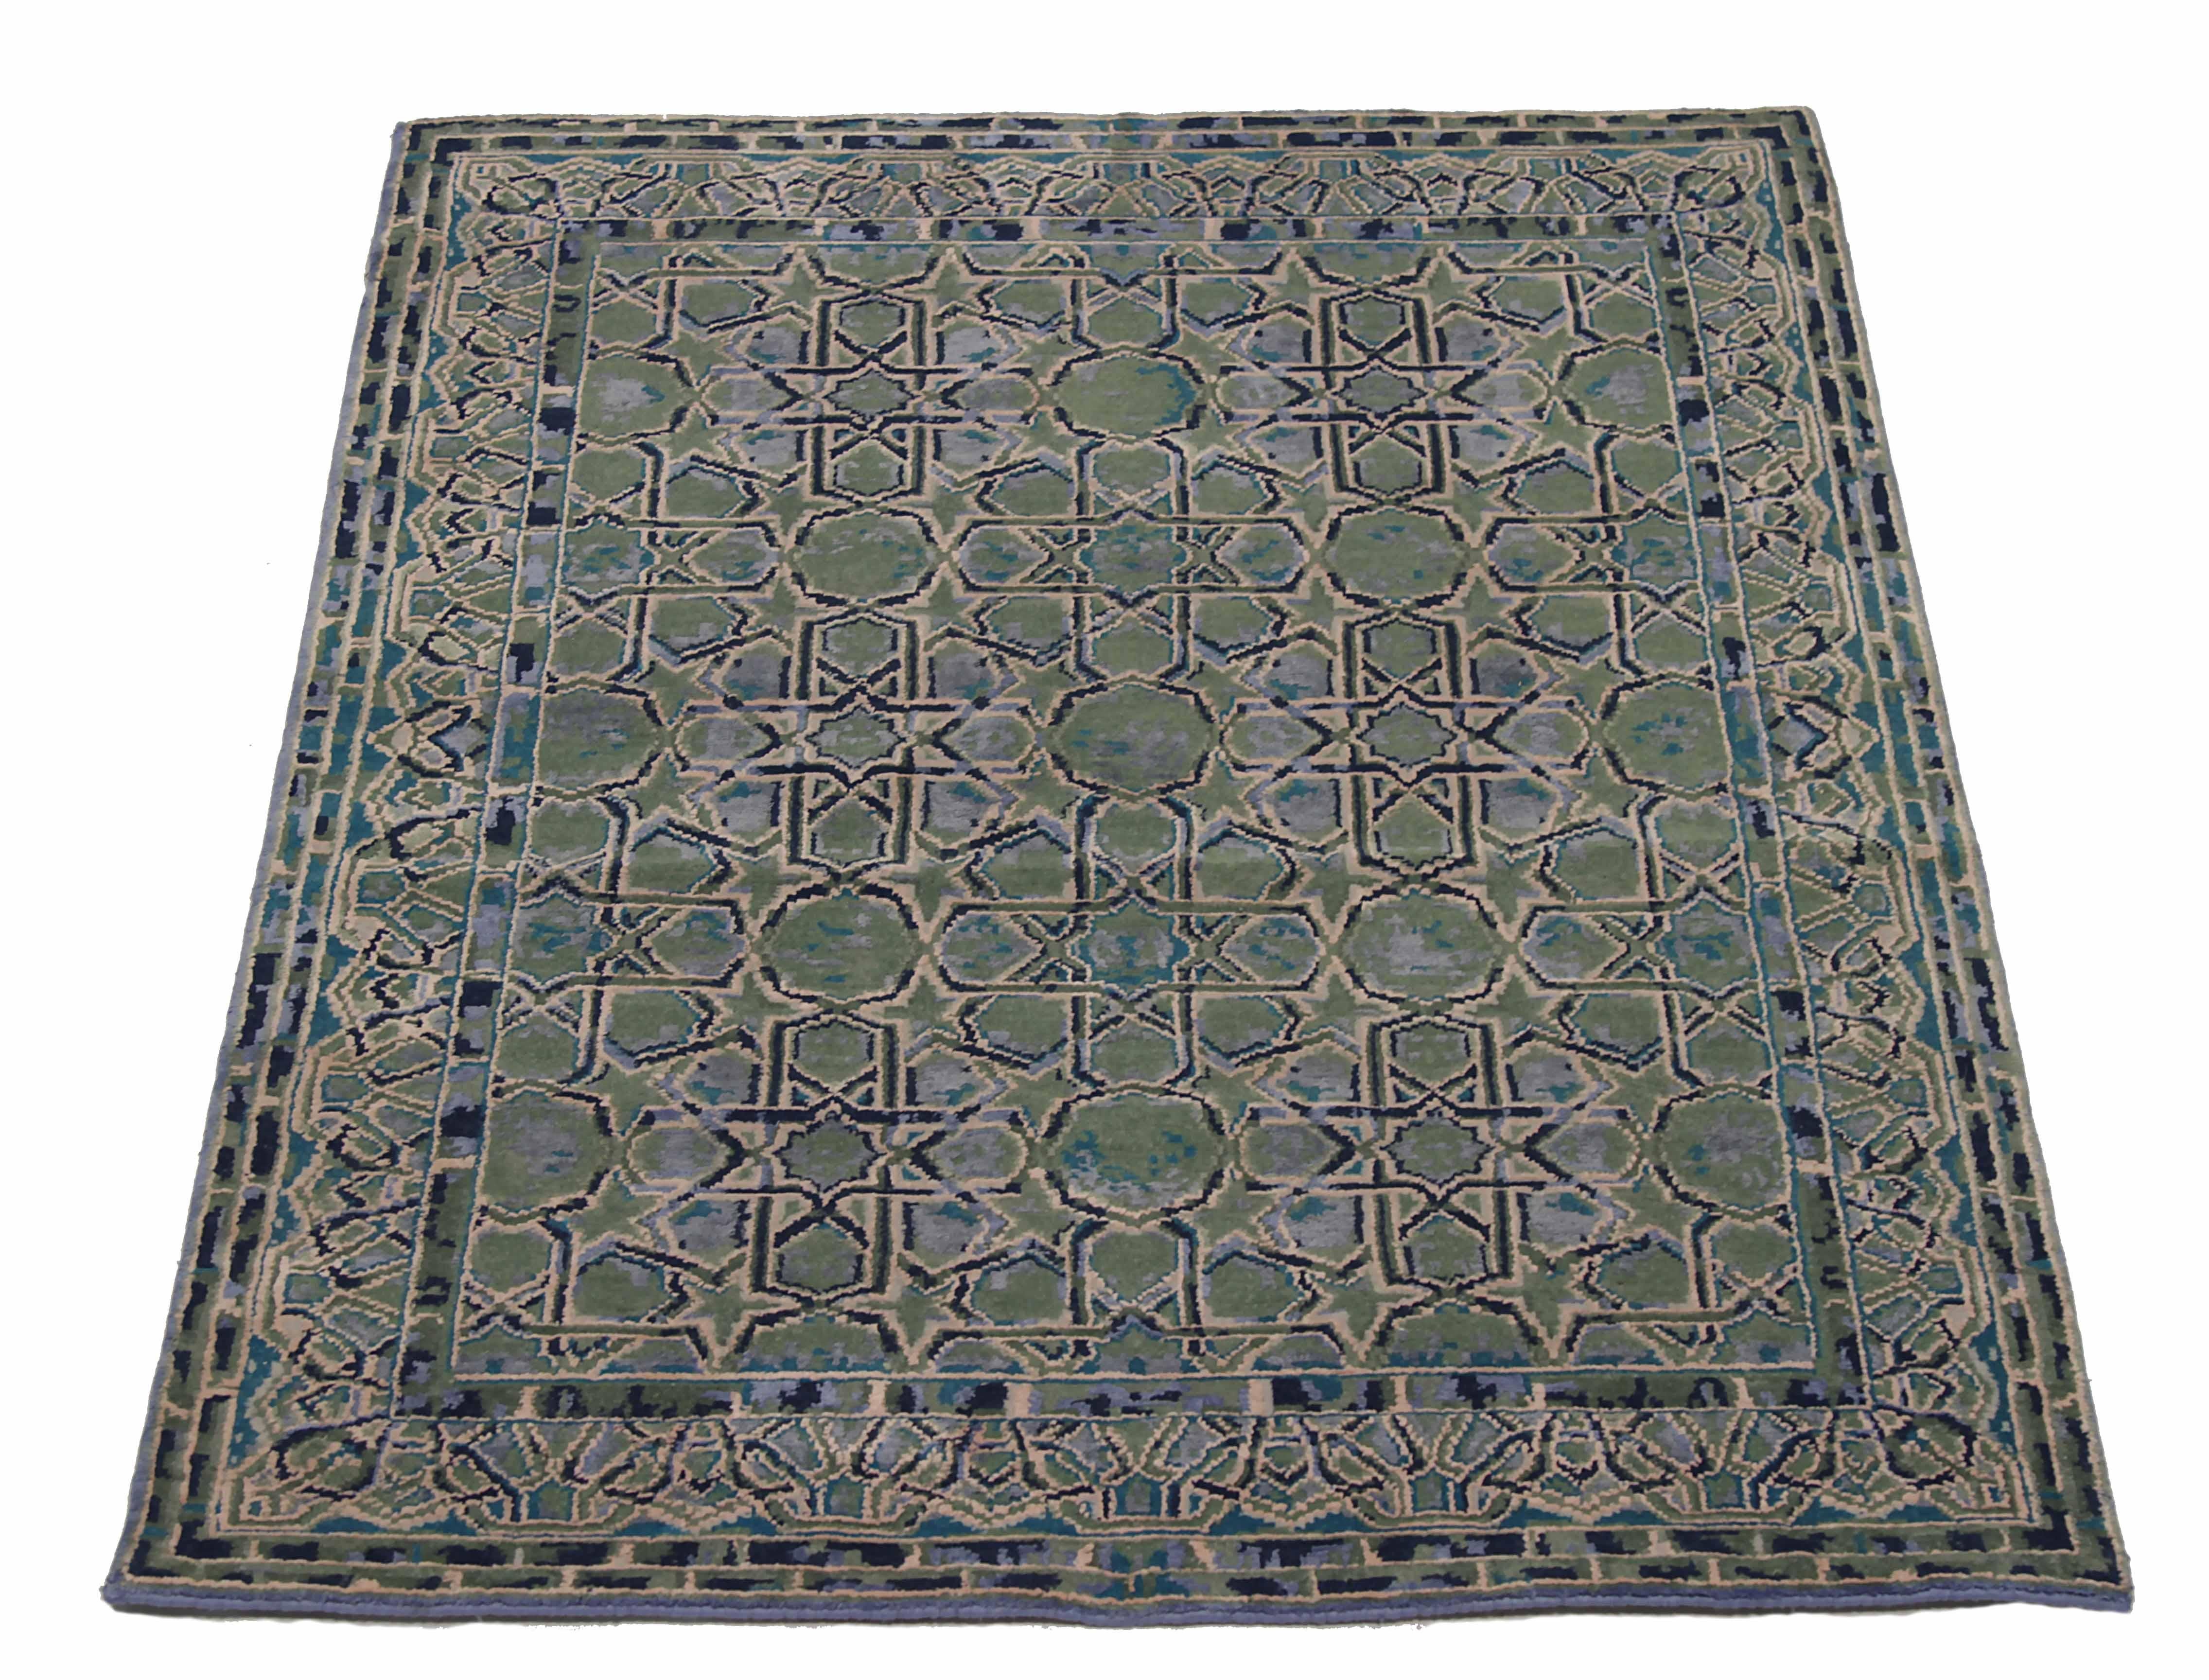 New area rug handwoven from the finest sheep’s wool and silk. It’s colored with all-natural vegetable dyes that are safe for humans and pets. It has a nice 4’ x 5’ dimension that works perfectly in small to medium-sized rooms and living spaces